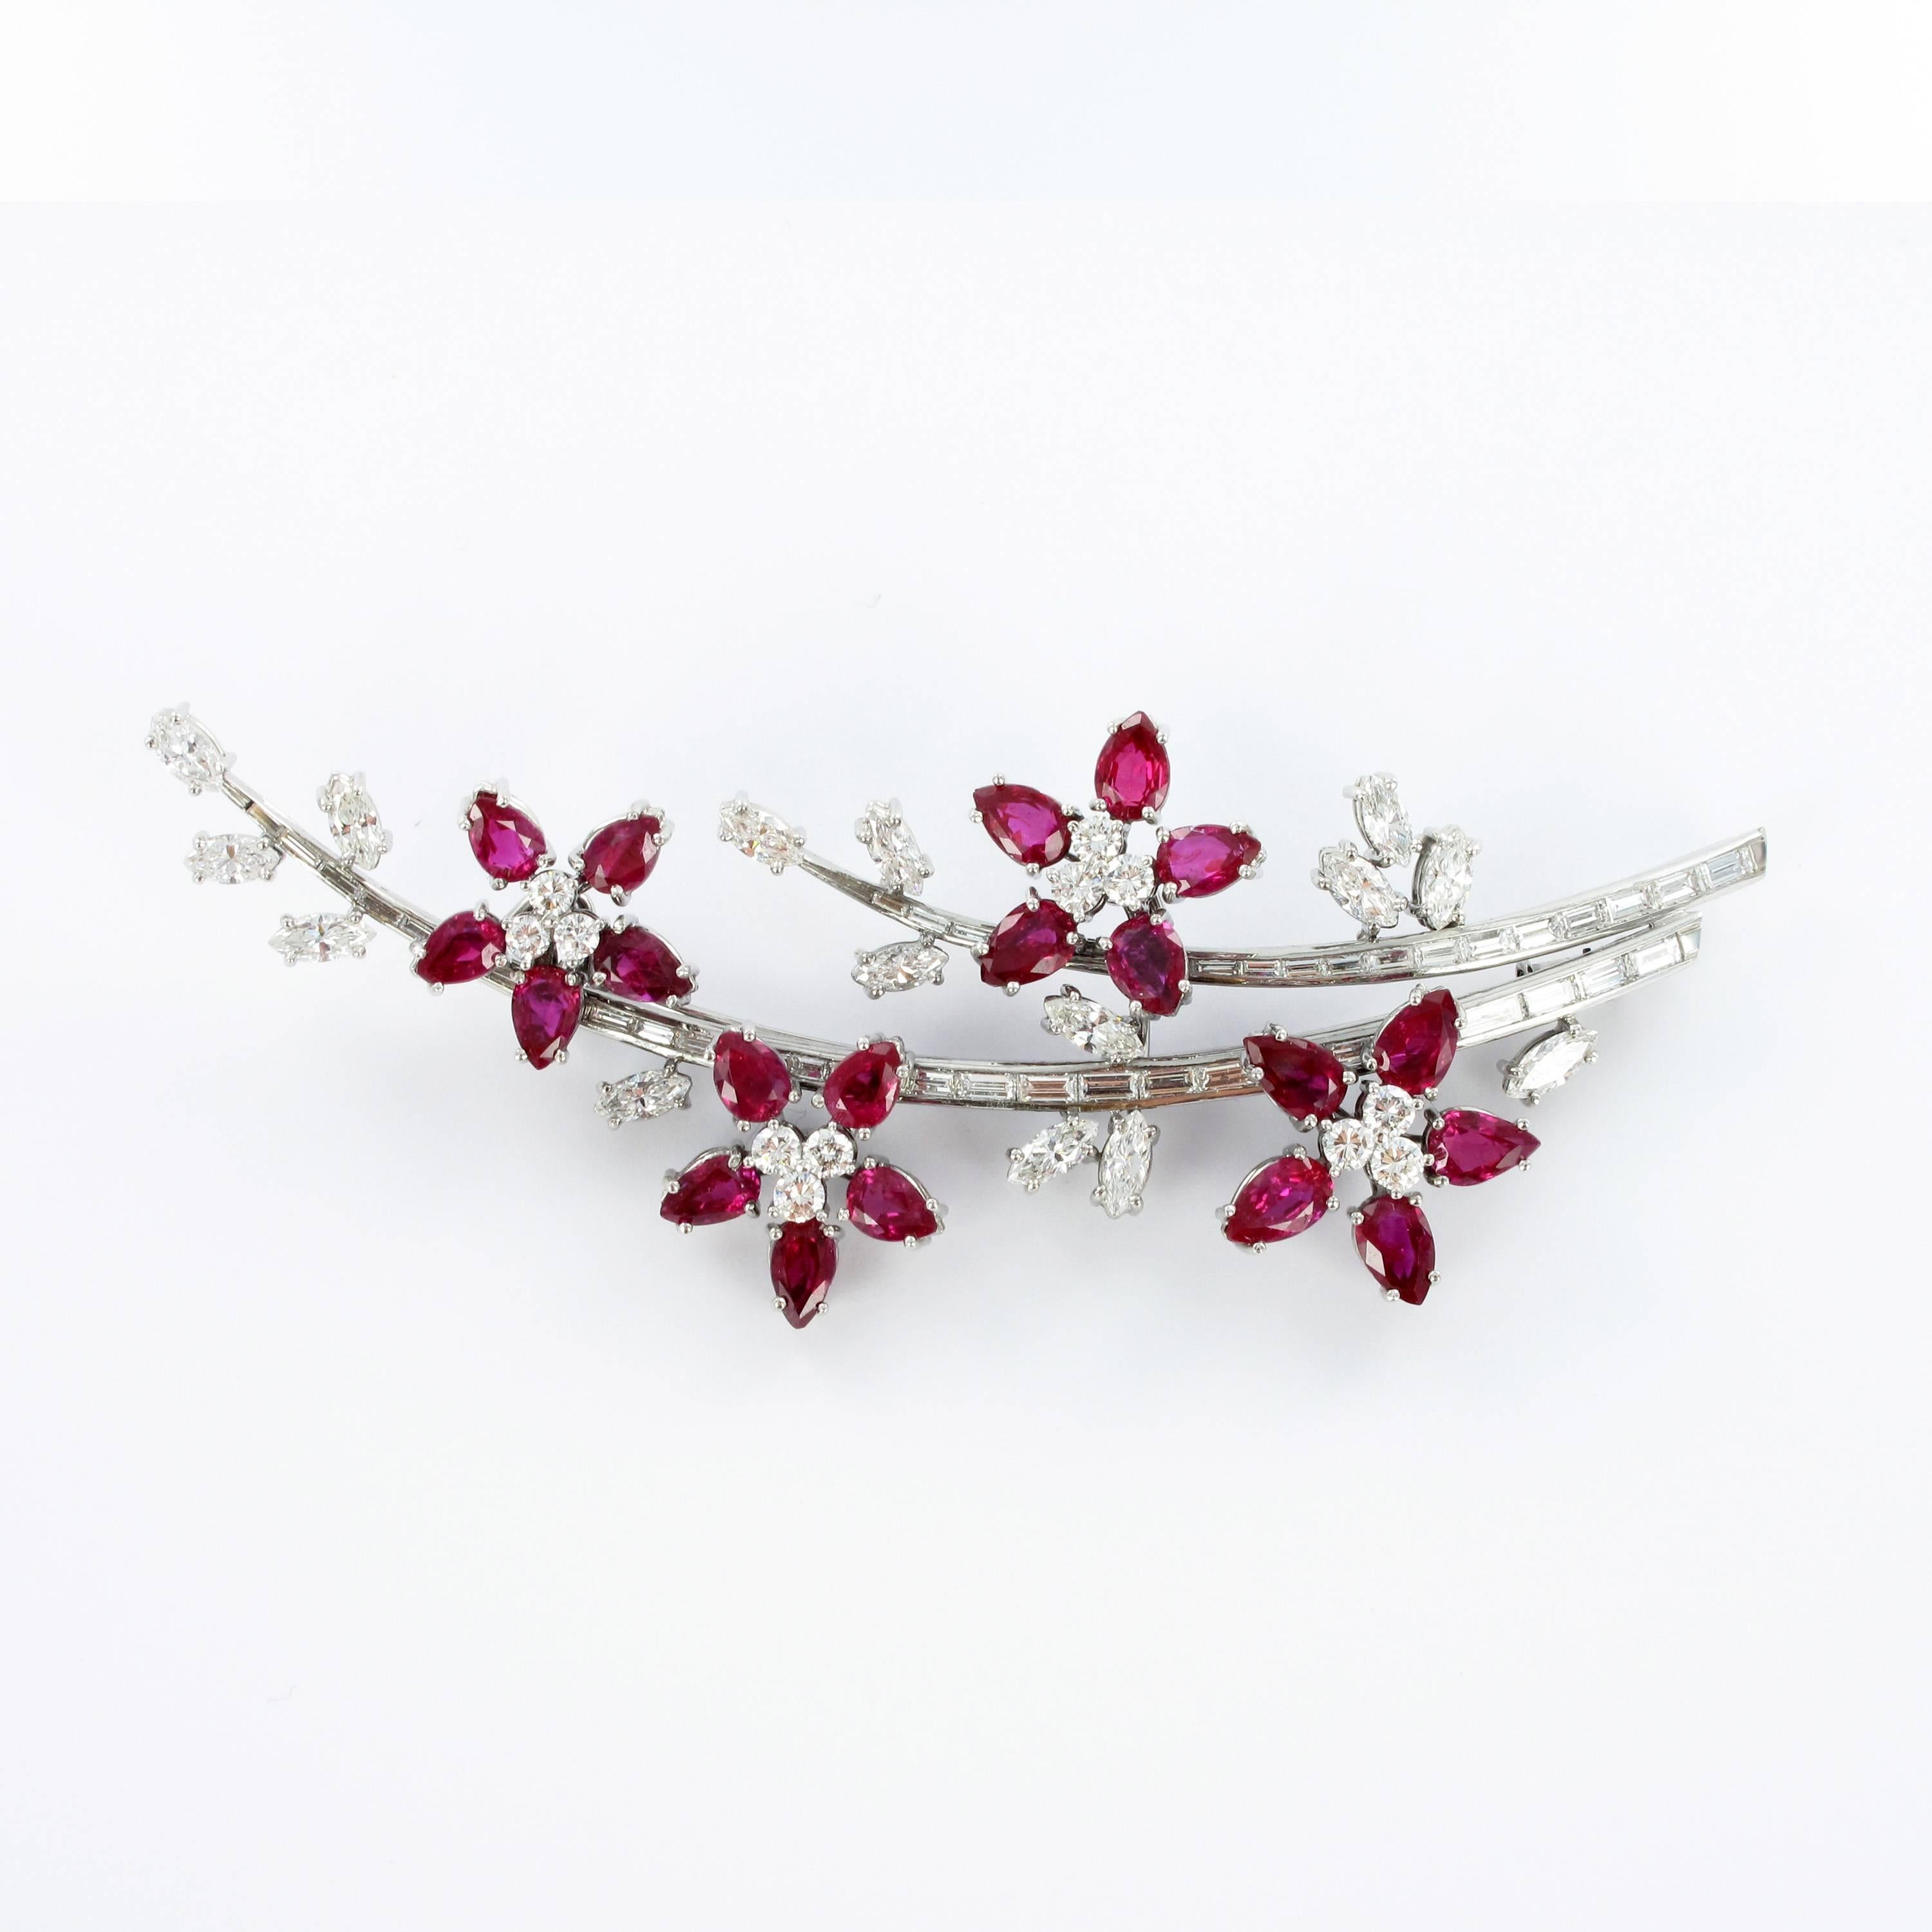 Brooch resembling two flower stalks decorated with four blossoms and leaves. Very finely crafted in platinum 950.
Each blossom is prong set 5 Burmese pear shape rubies and 3 brilliant cut diamonds. The two stalks are chanel set with 36 baguette cut